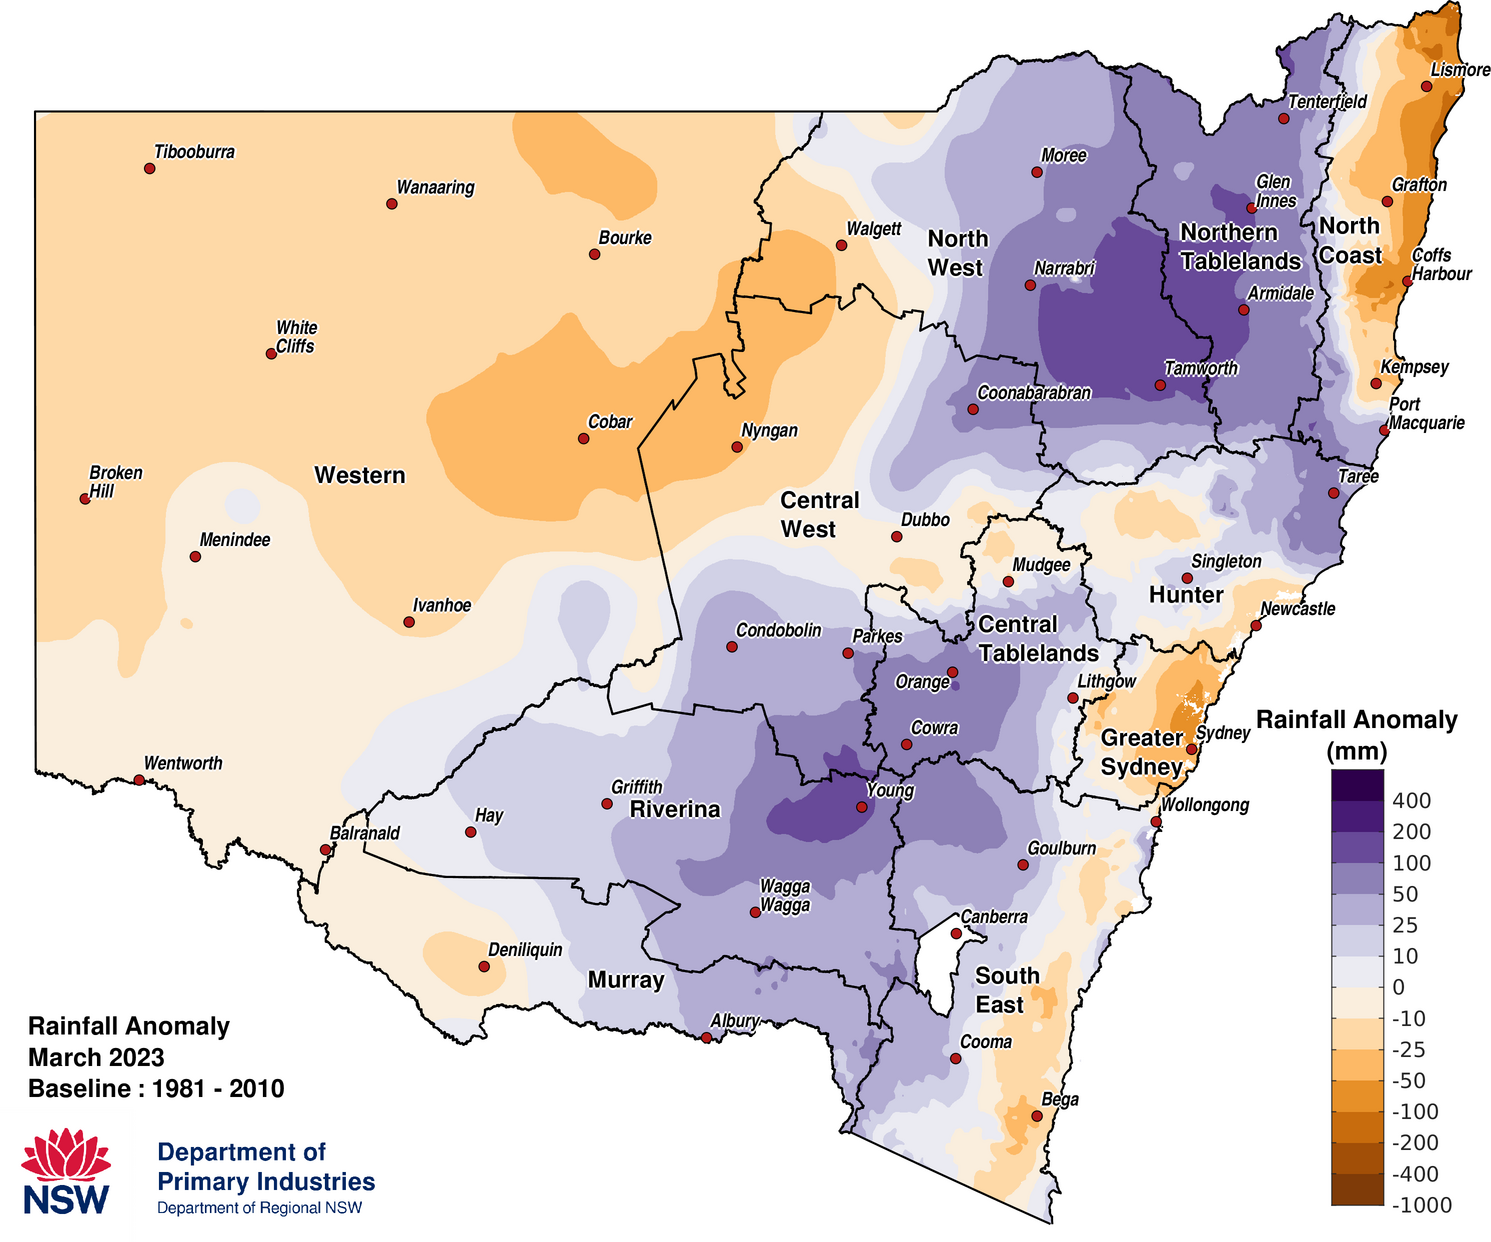 Figure 2a. Rainfall anomaly – March 2023